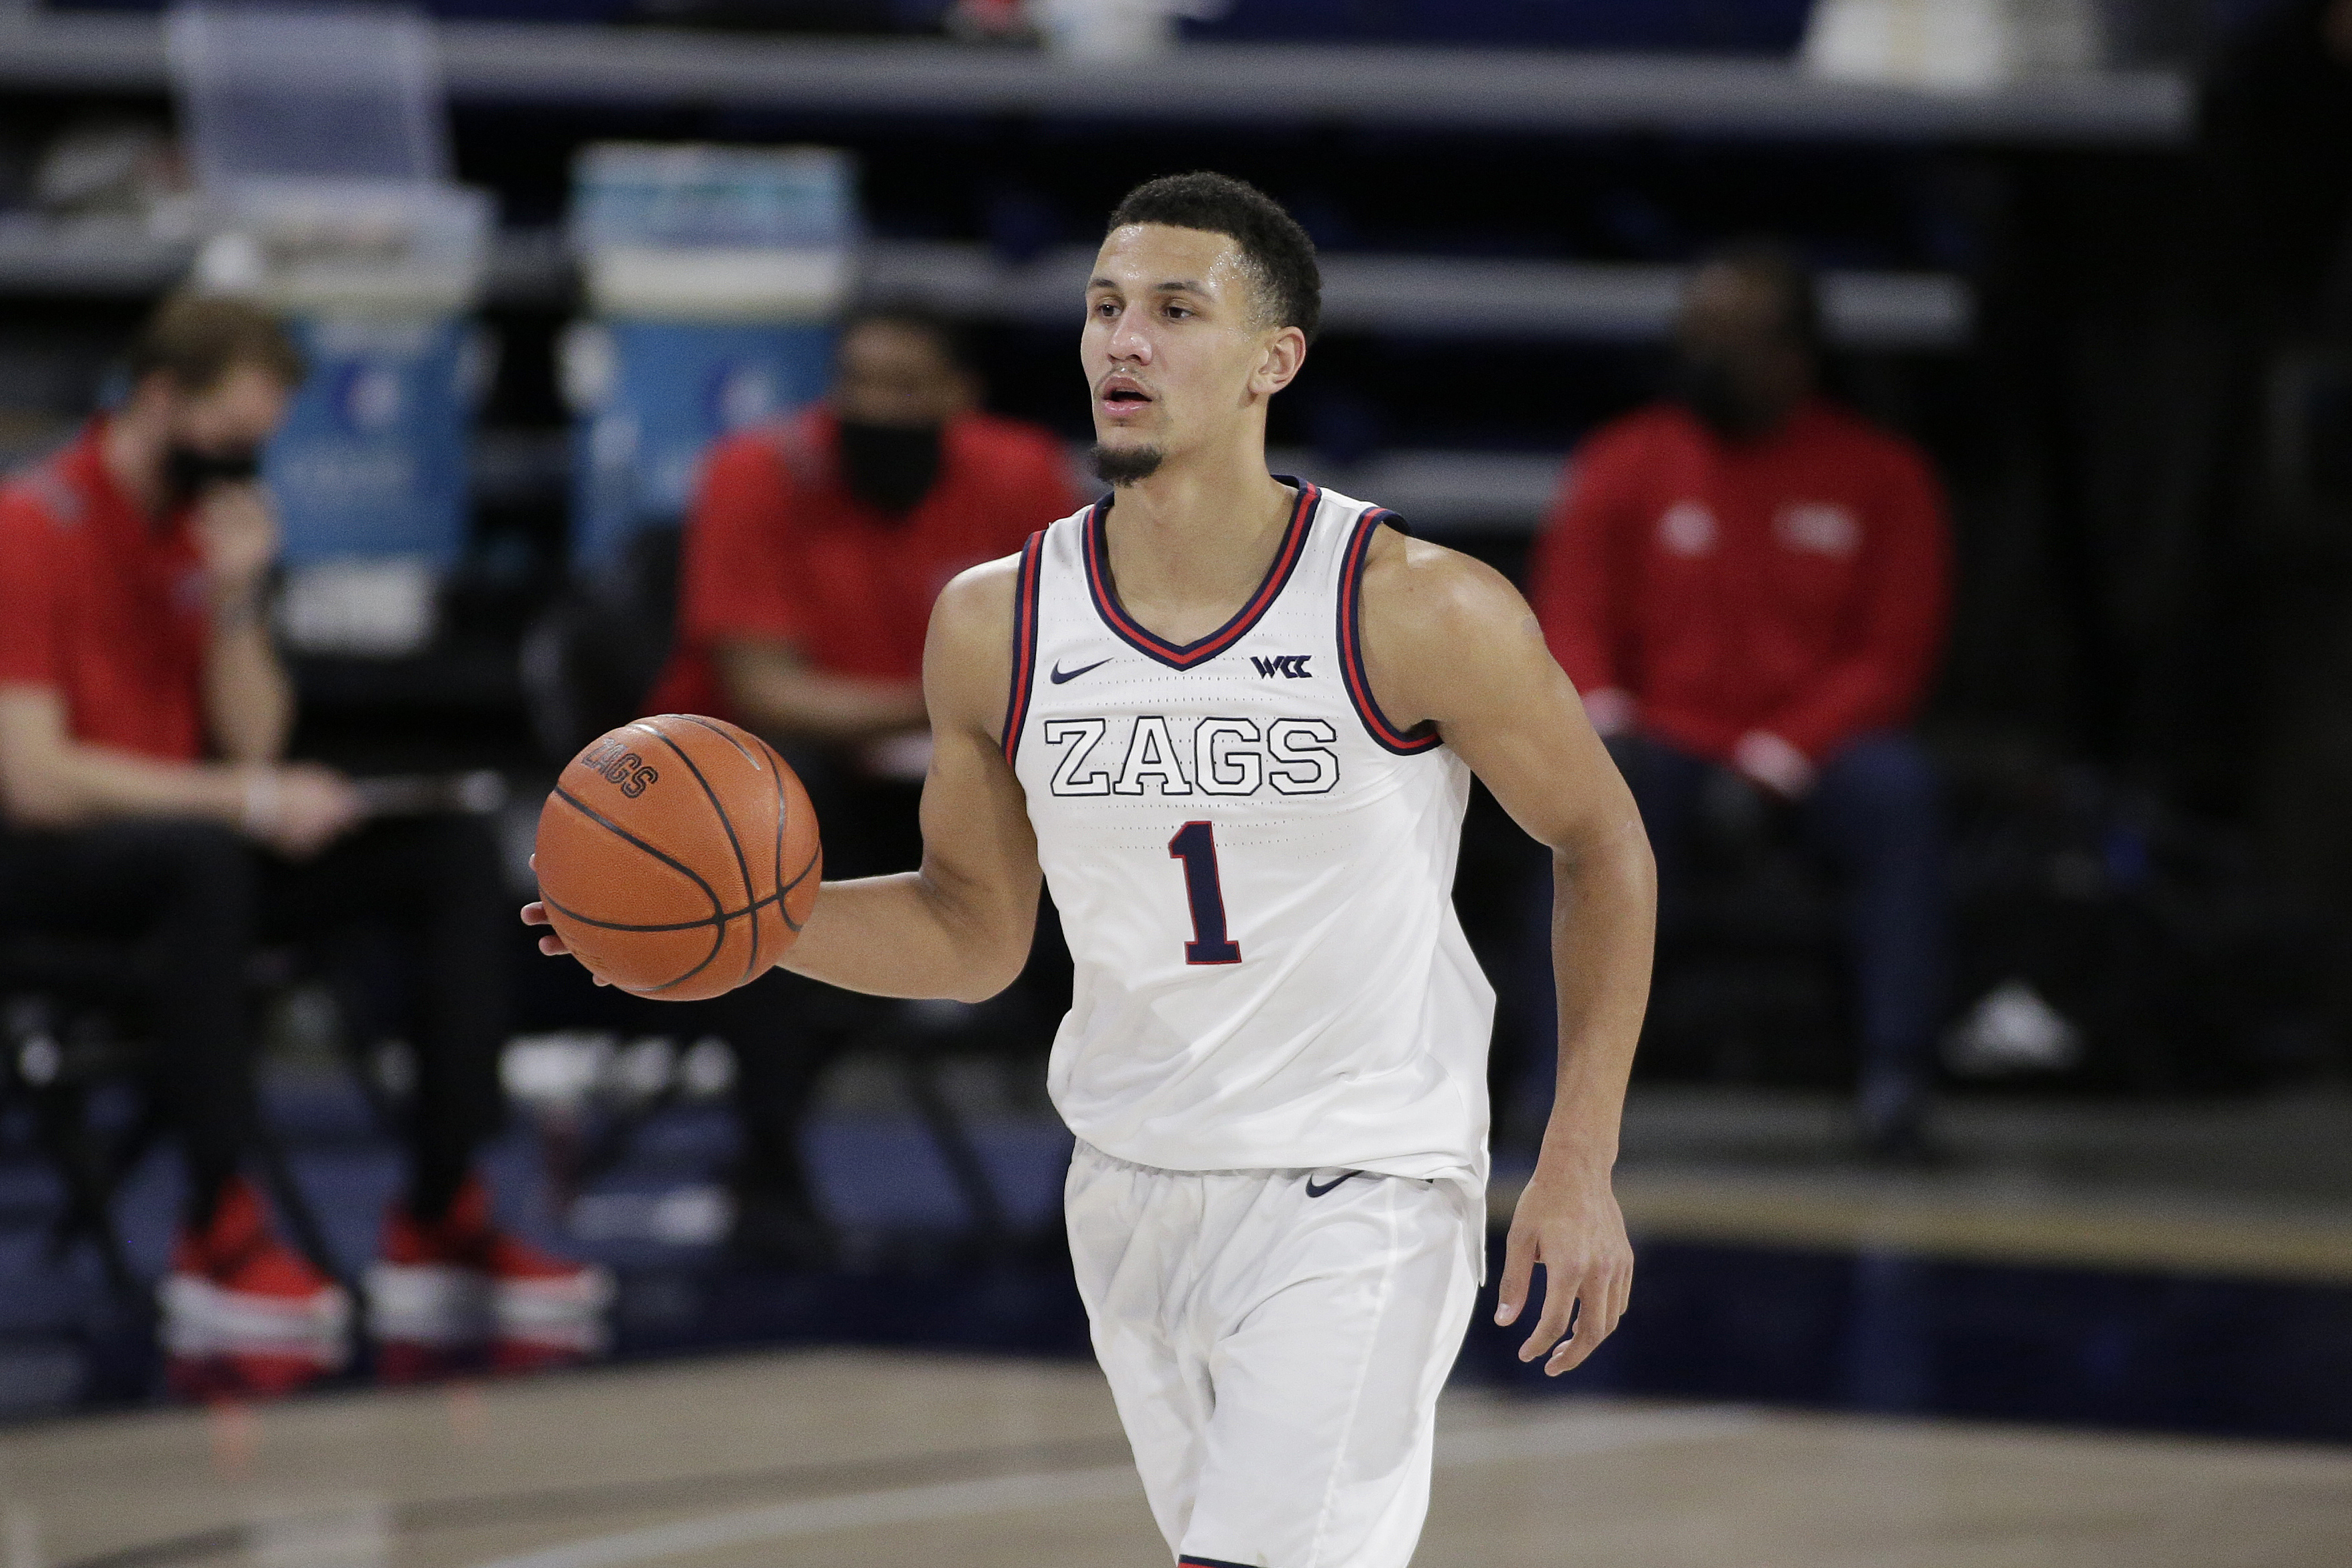 Jalen Suggs to reveal college plans Friday during nationally televised game